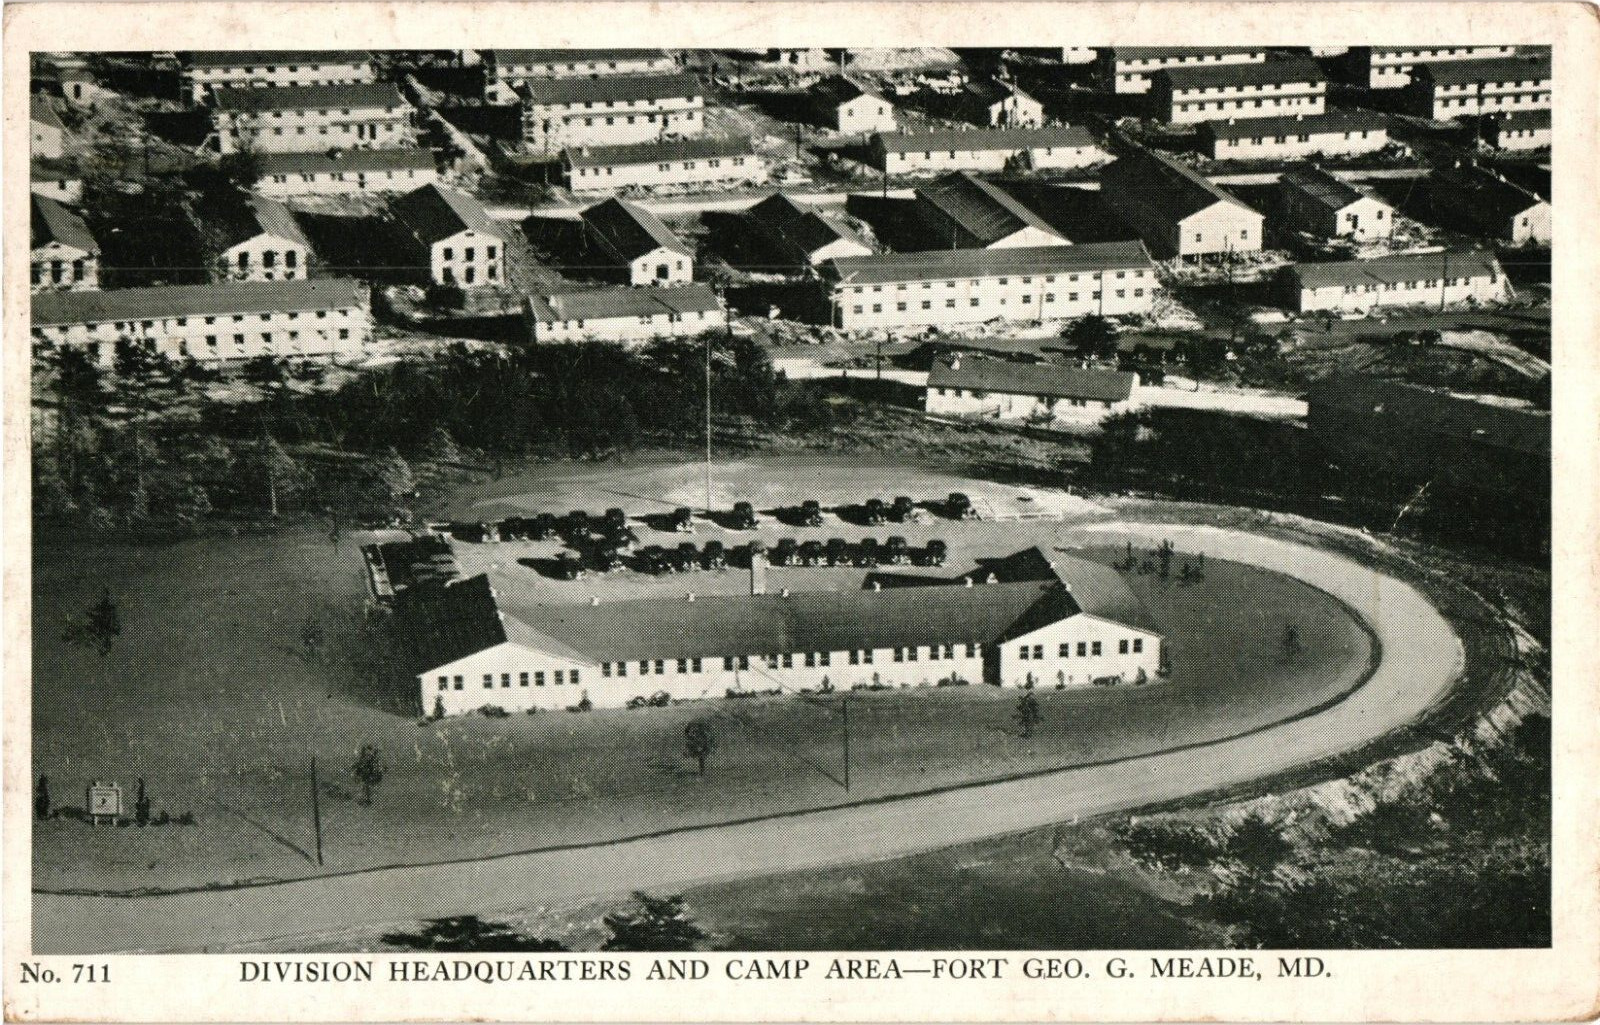 Aerial 1943 Fort Geo G Meade Maryland Division Headquarters & Camp Area Postcard